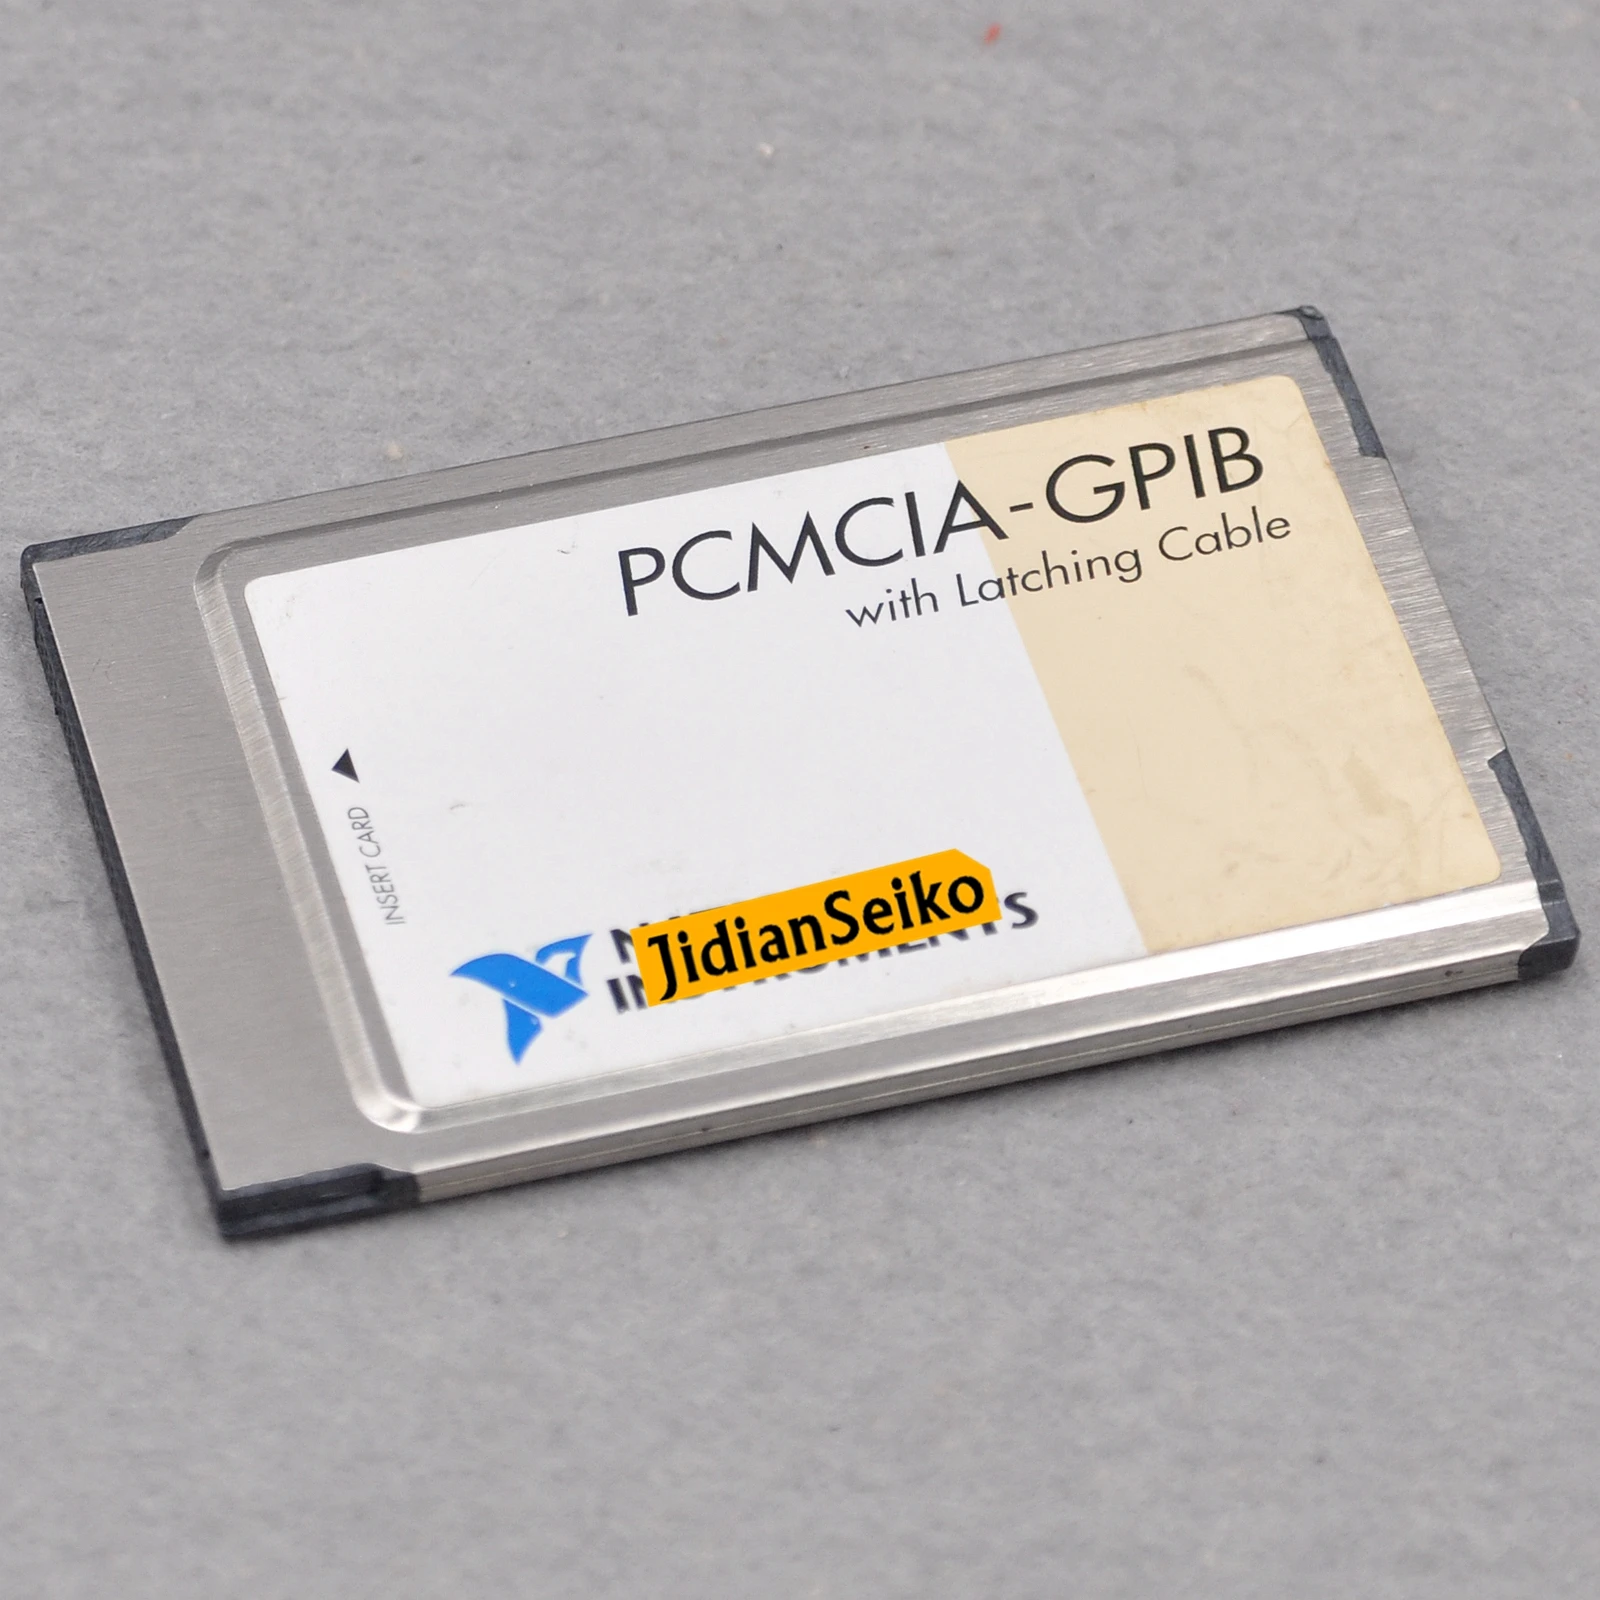 National Instruments Ni PCMCIA GPIB Card 186736c 01 for sale online 